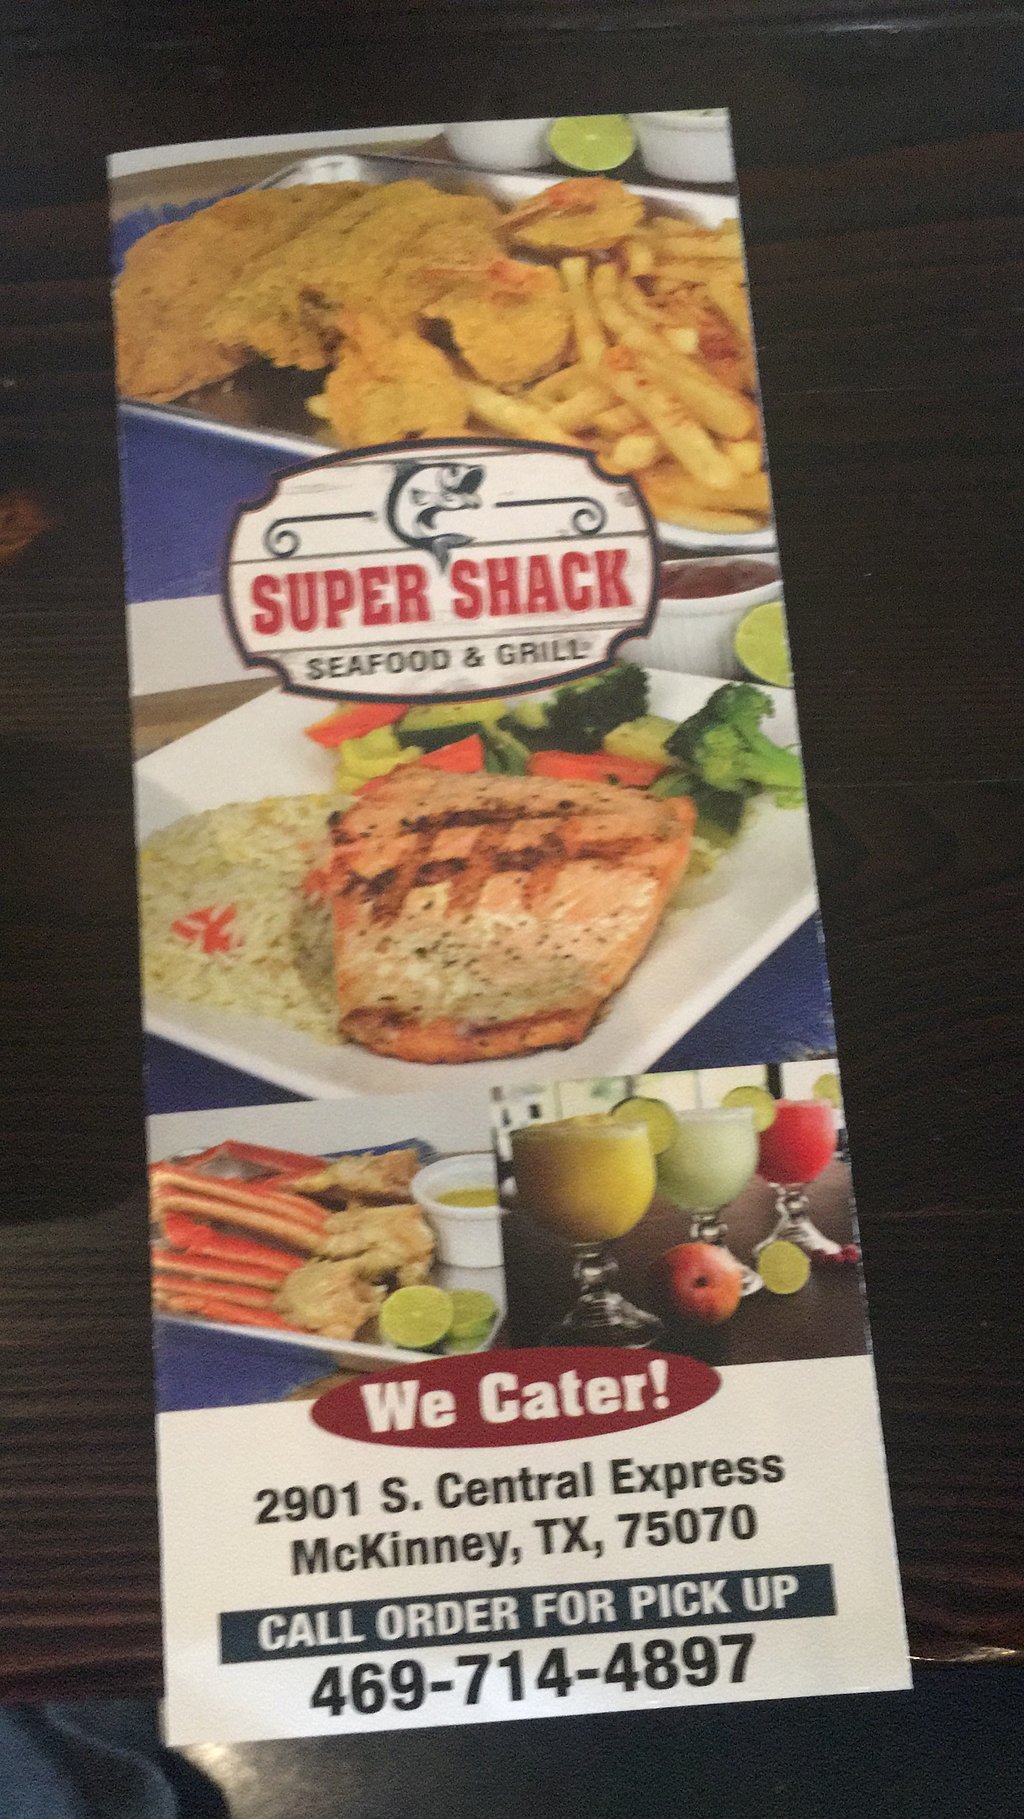 Super Shack Seafood & Grill